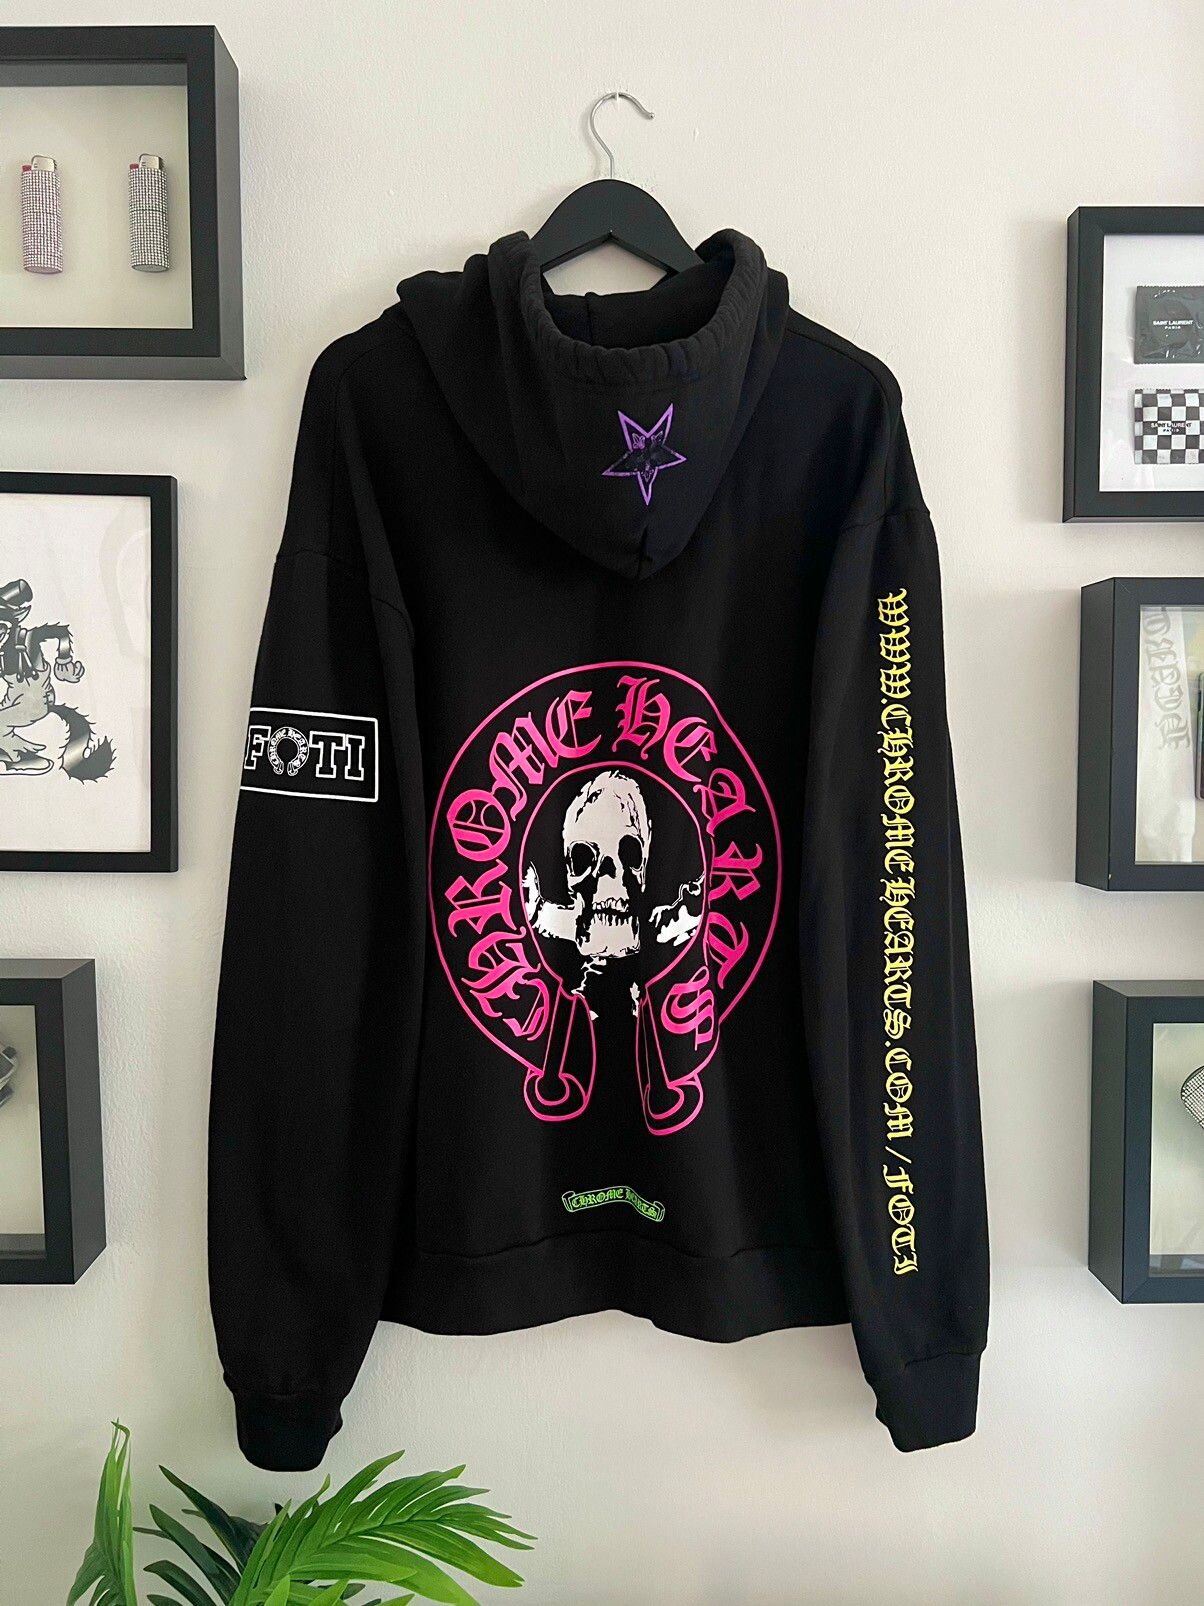 Chrome Hearts Online Exclusive Hoodie